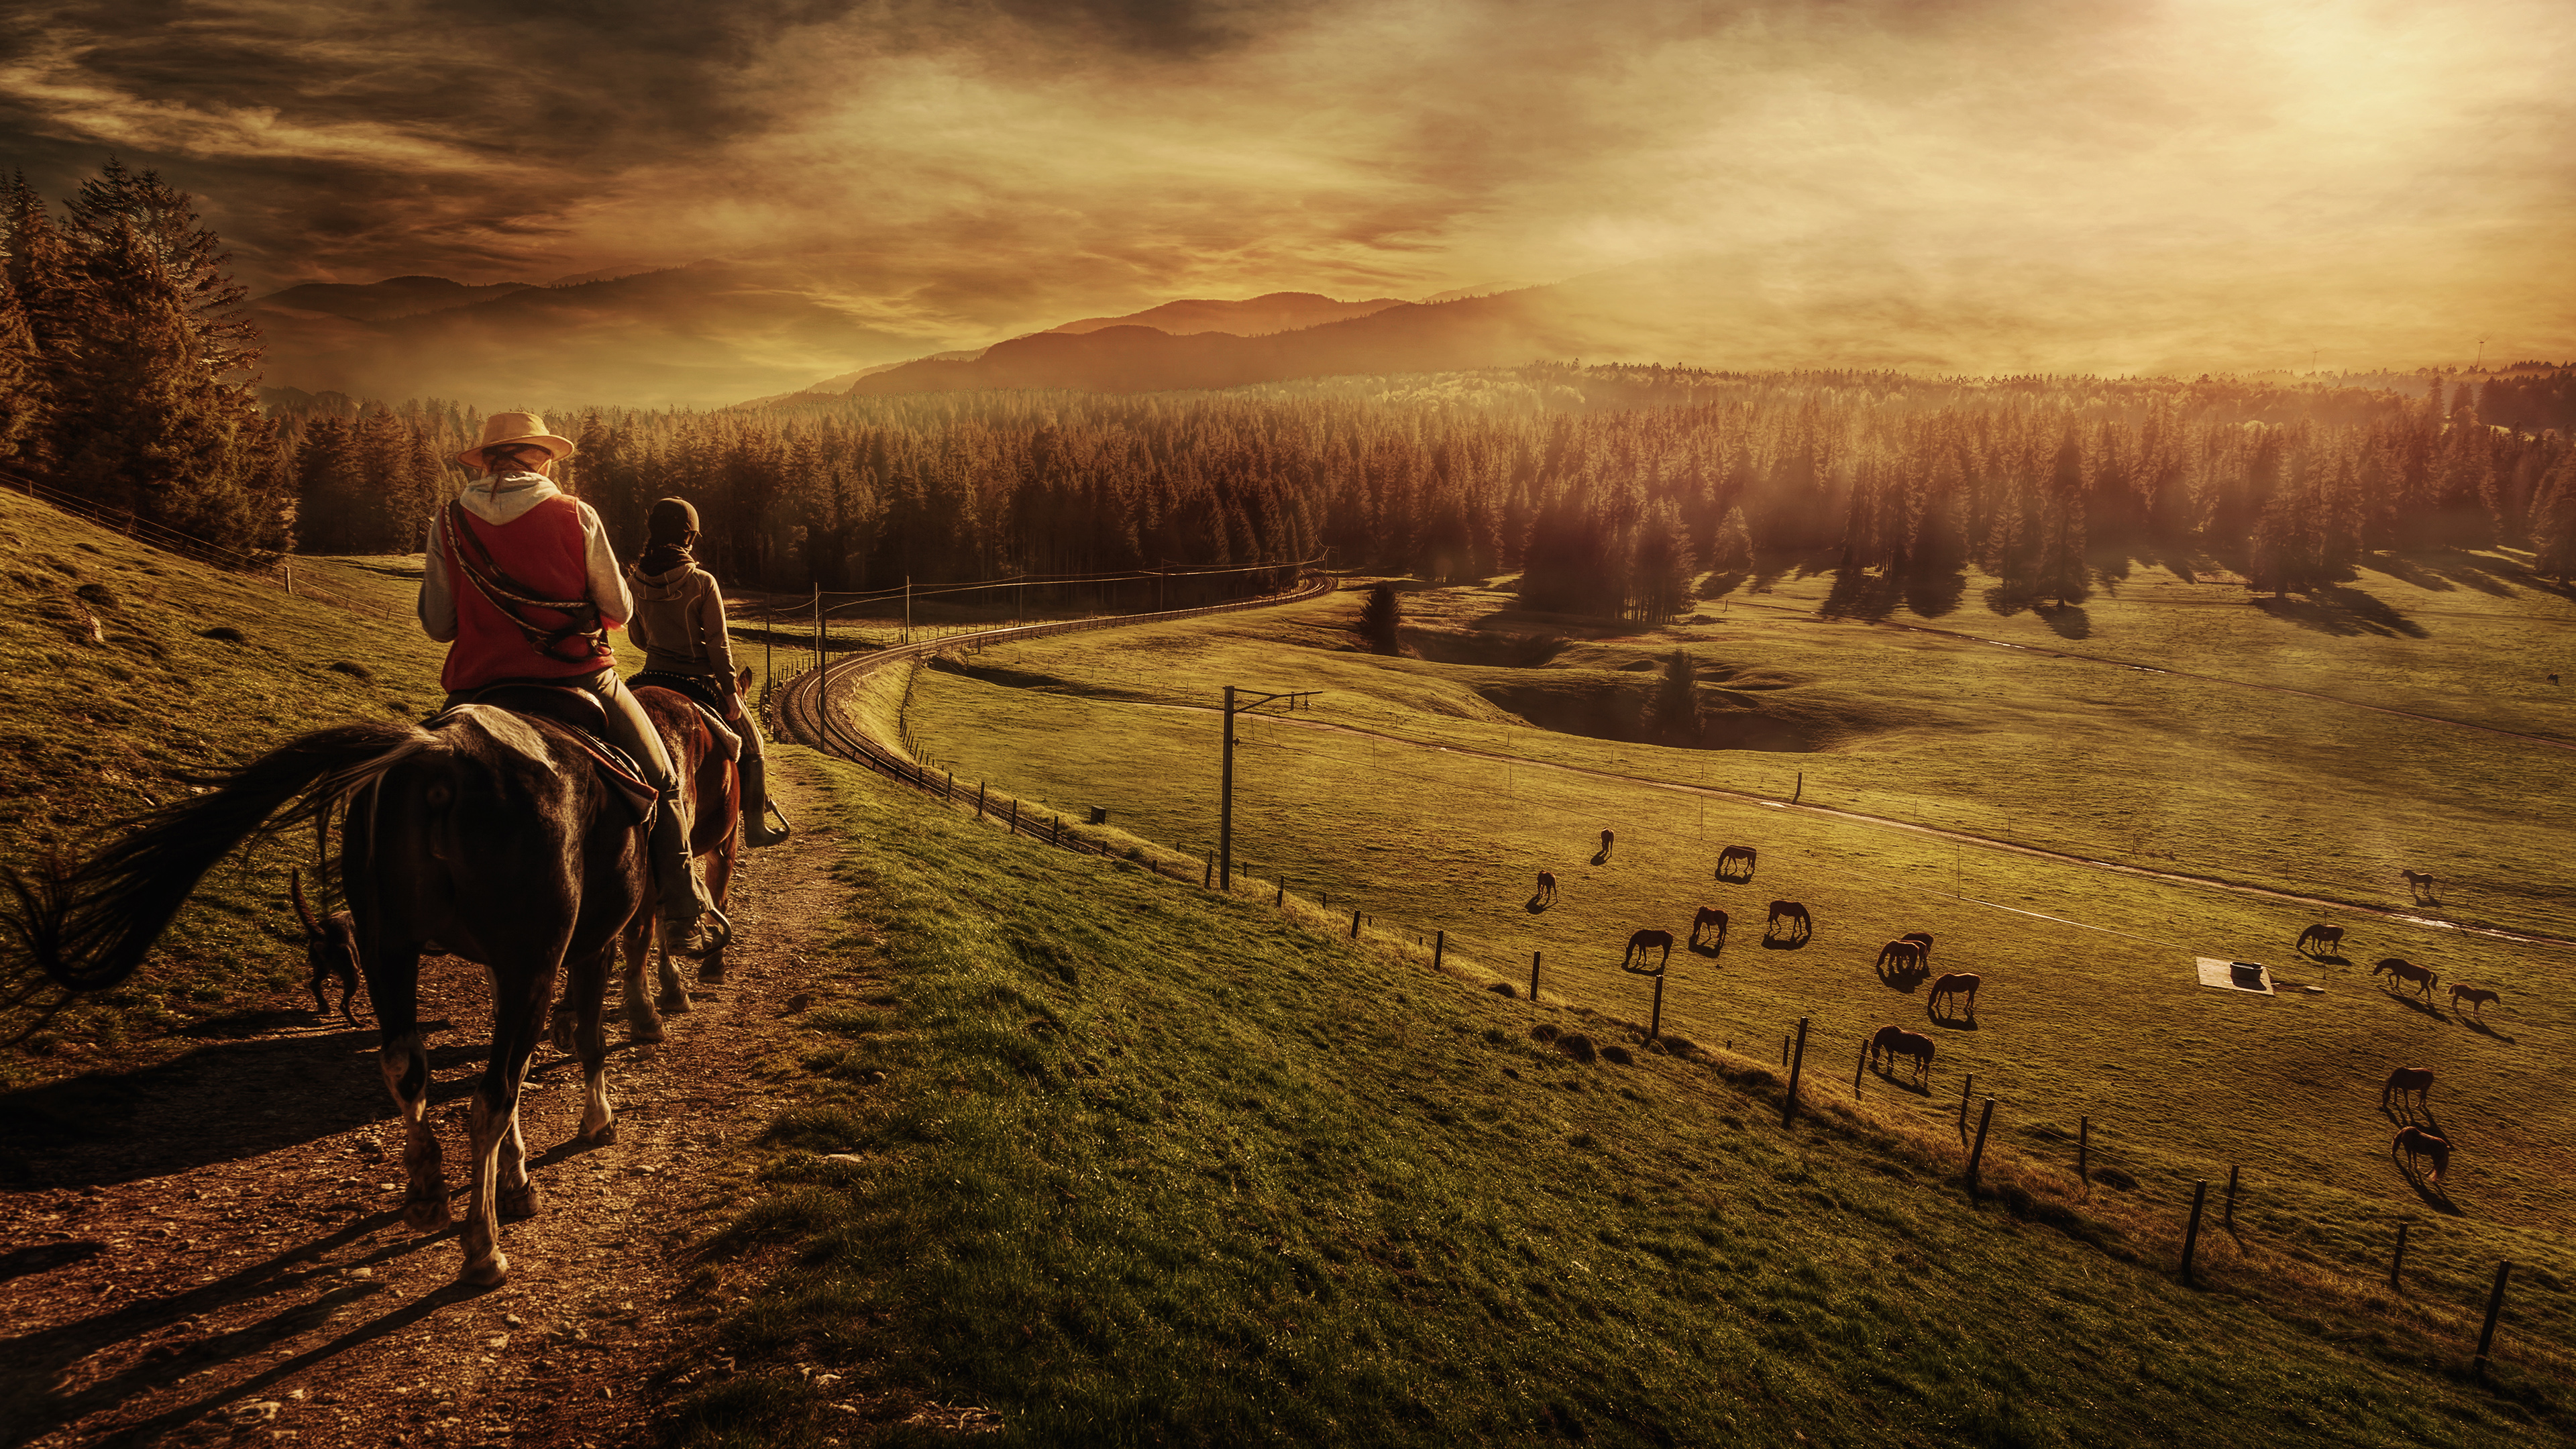 android photography, landscape, people, horse, horse riding, sunset